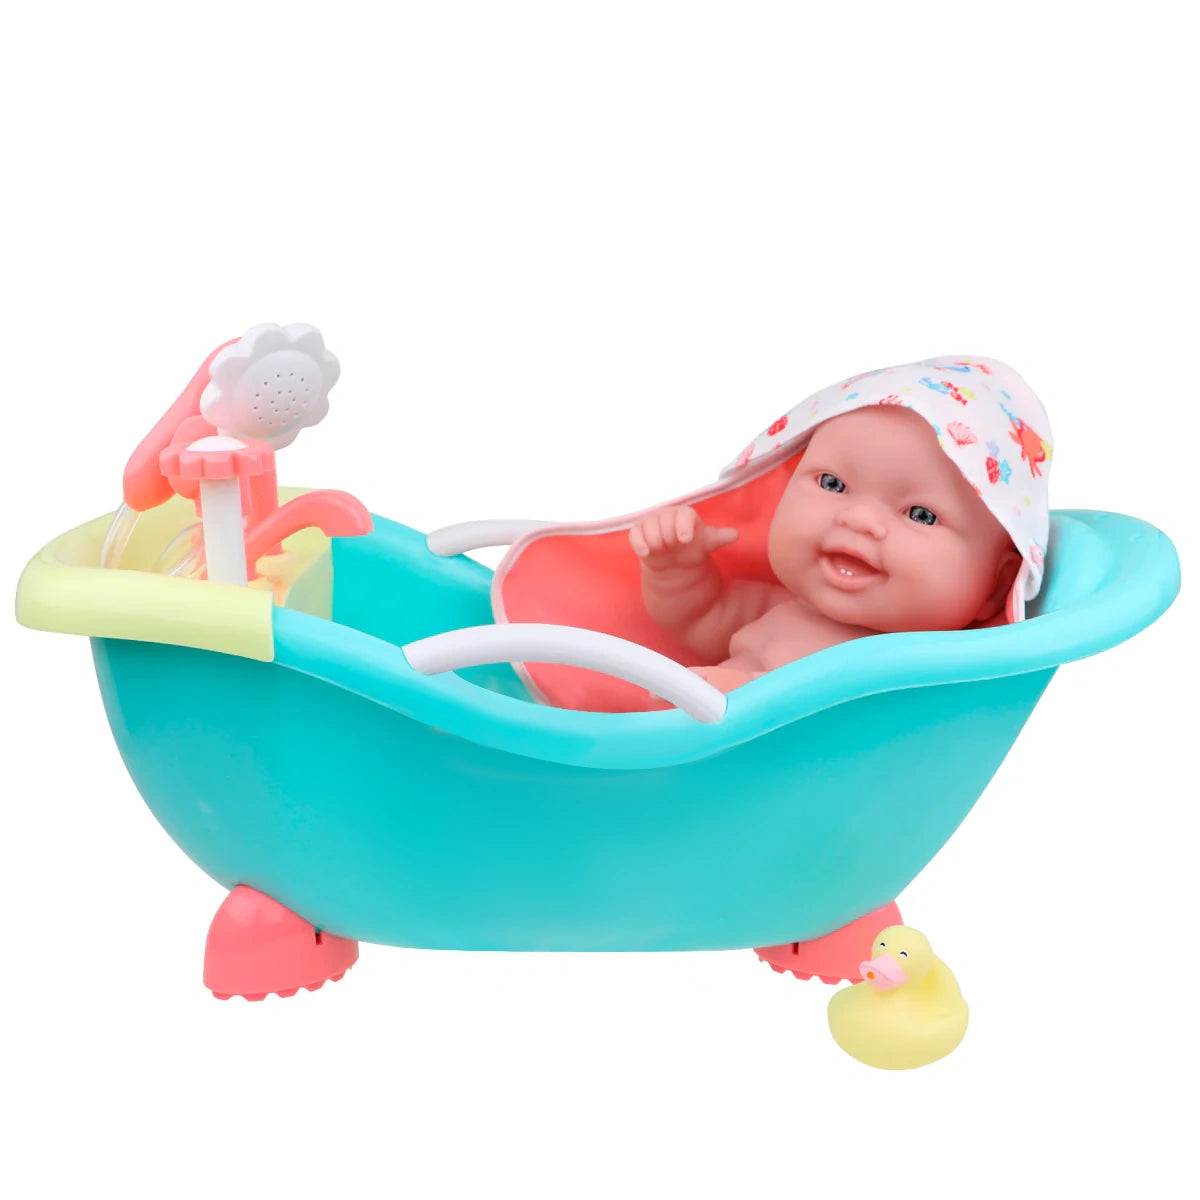 JC Toys, Lots to Love Babies 14" All-Vinyl Doll Bathtub Gift Set with Rubber Ducky